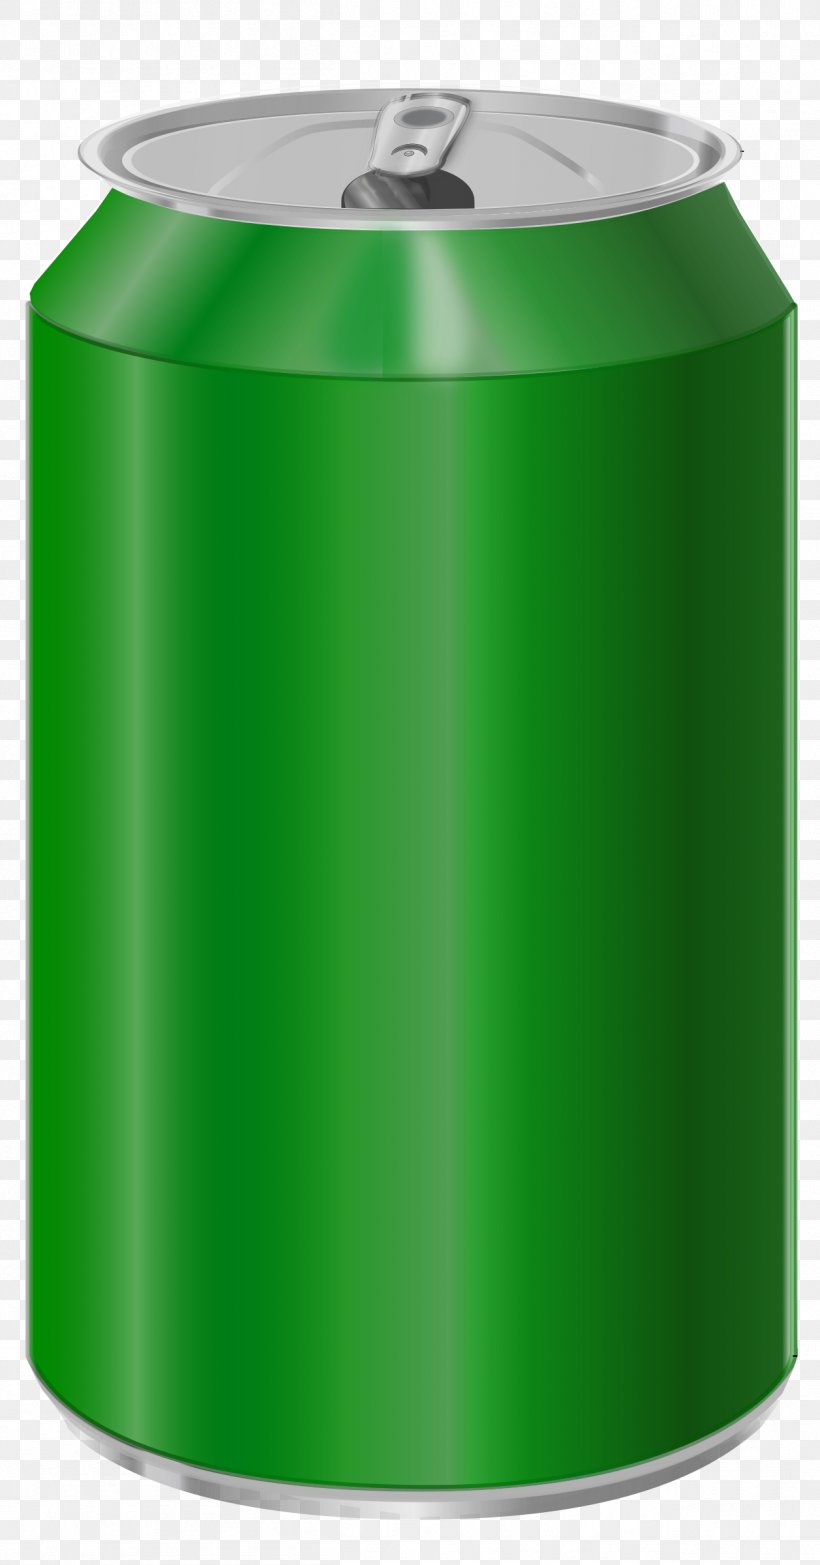 Fizzy Drinks Coca-Cola Beer Carbonated Water Beverage Can, PNG, 1257x2400px, Fizzy Drinks, Alcoholic Drink, Beer, Beverage Can, Carbonated Water Download Free